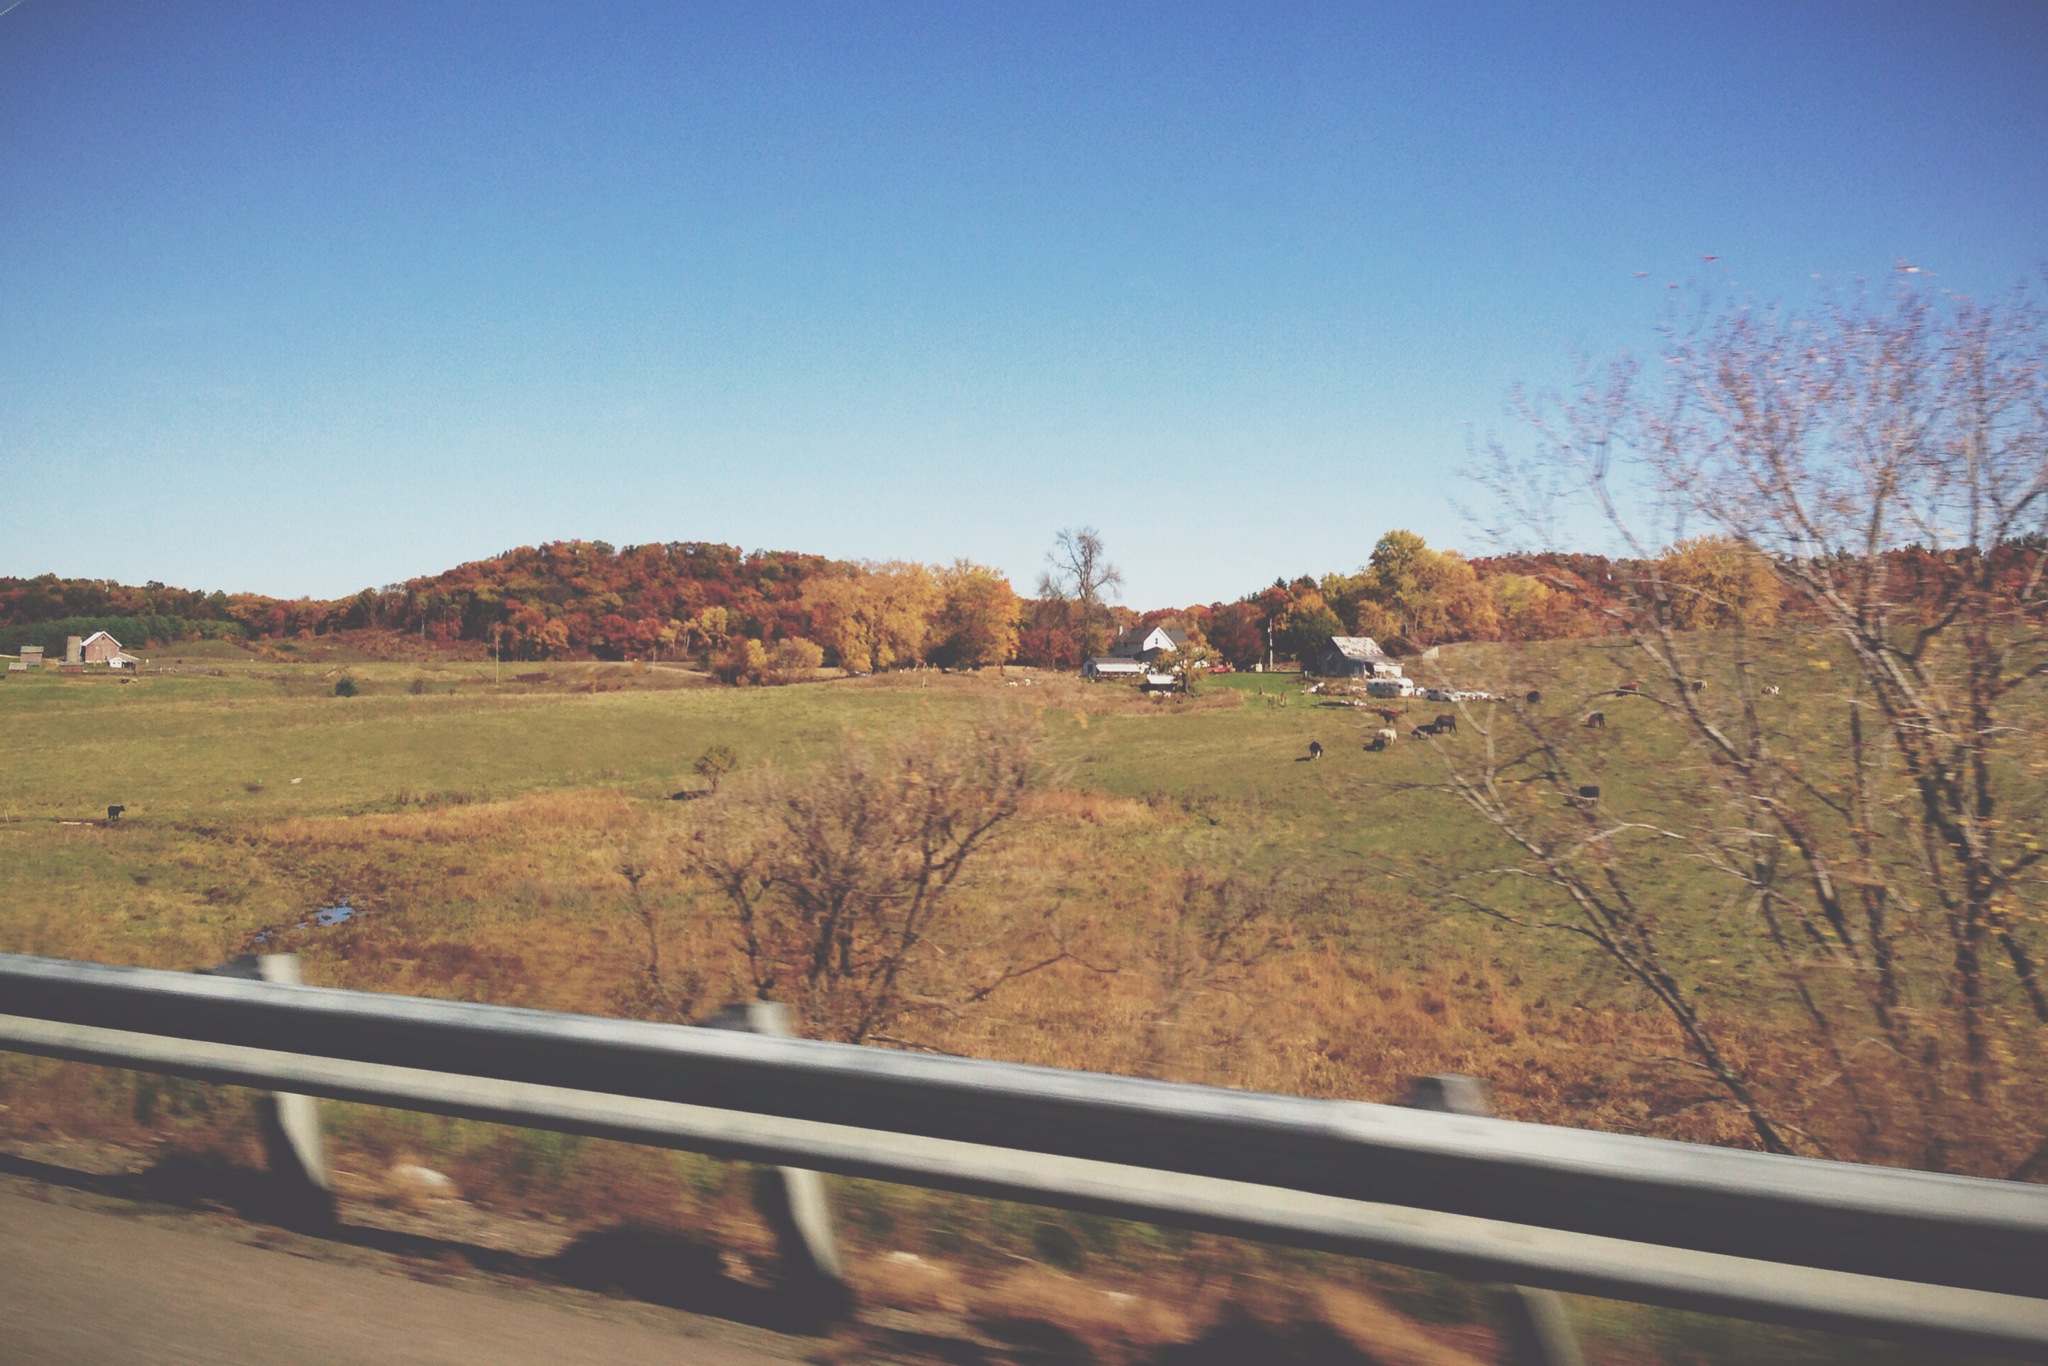 View from a car window… happy fall!